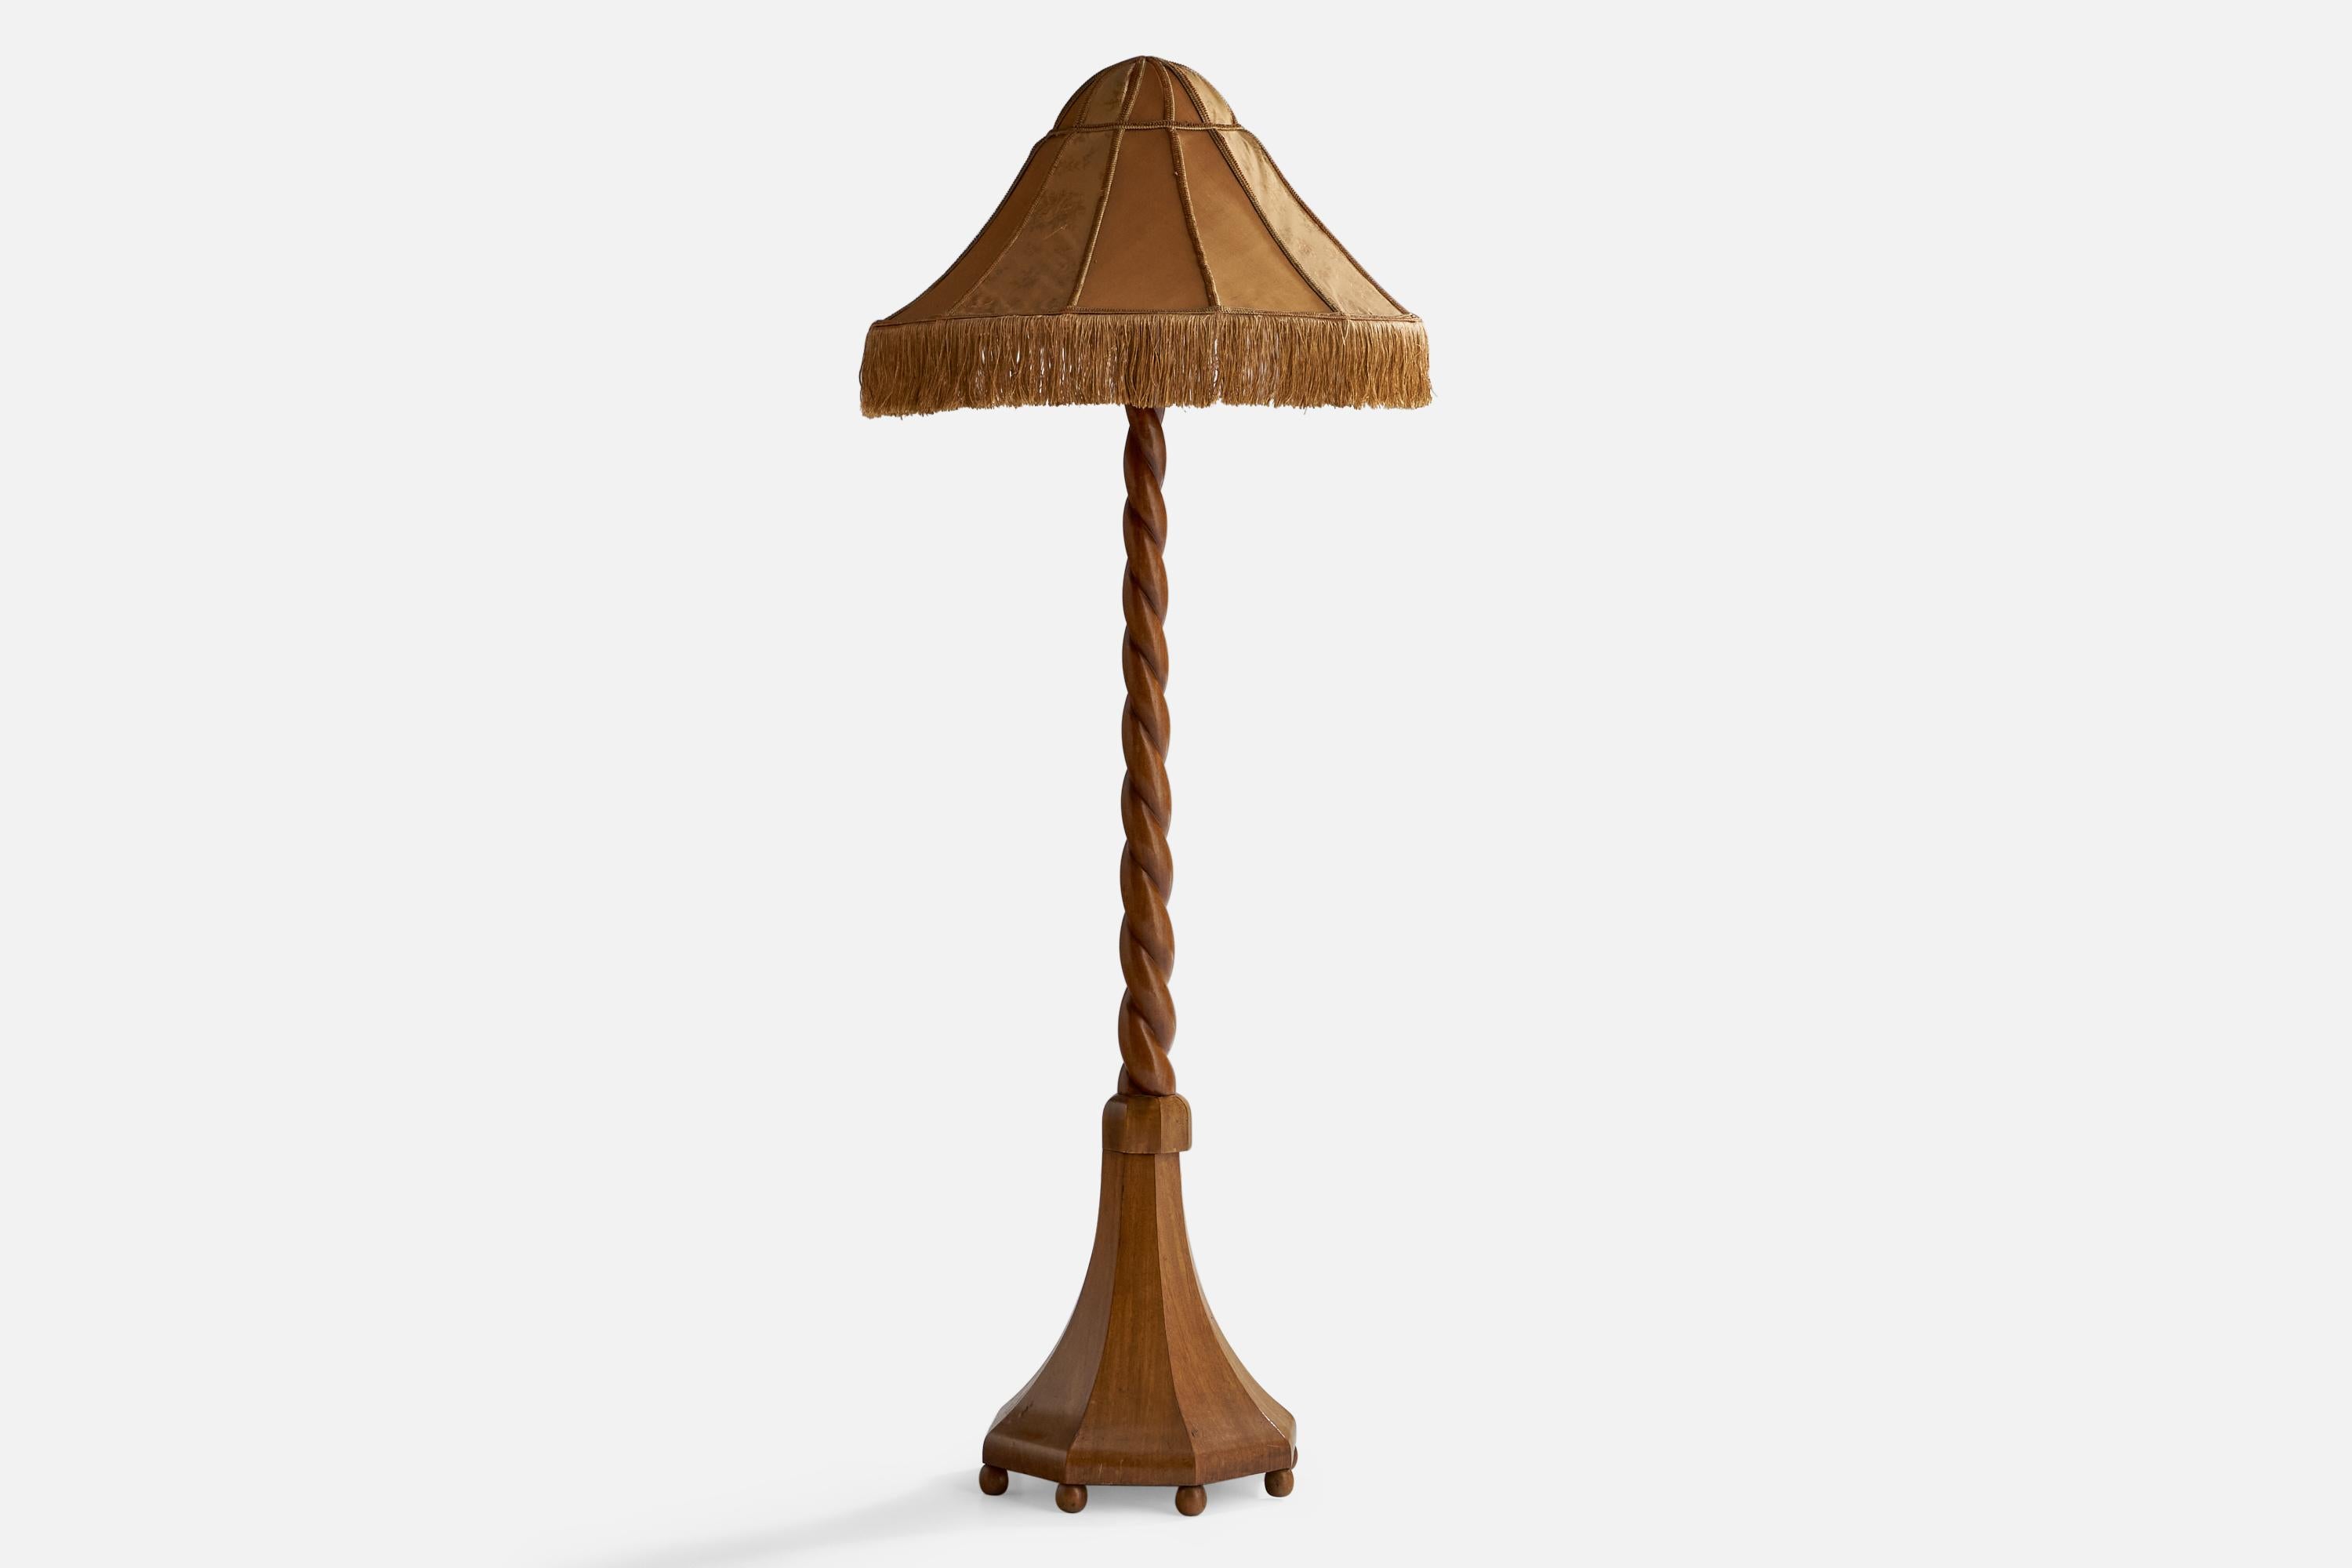 A carved oak and beige brown fabric floor lamp designed and produced in Sweden, c. 1910s.

Overall Dimensions (inches): 72” H x 28” Diameter
Bulb Specifications: E-26 Bulb
Number of Sockets: 2
 
All lighting will be converted for US usage. We are